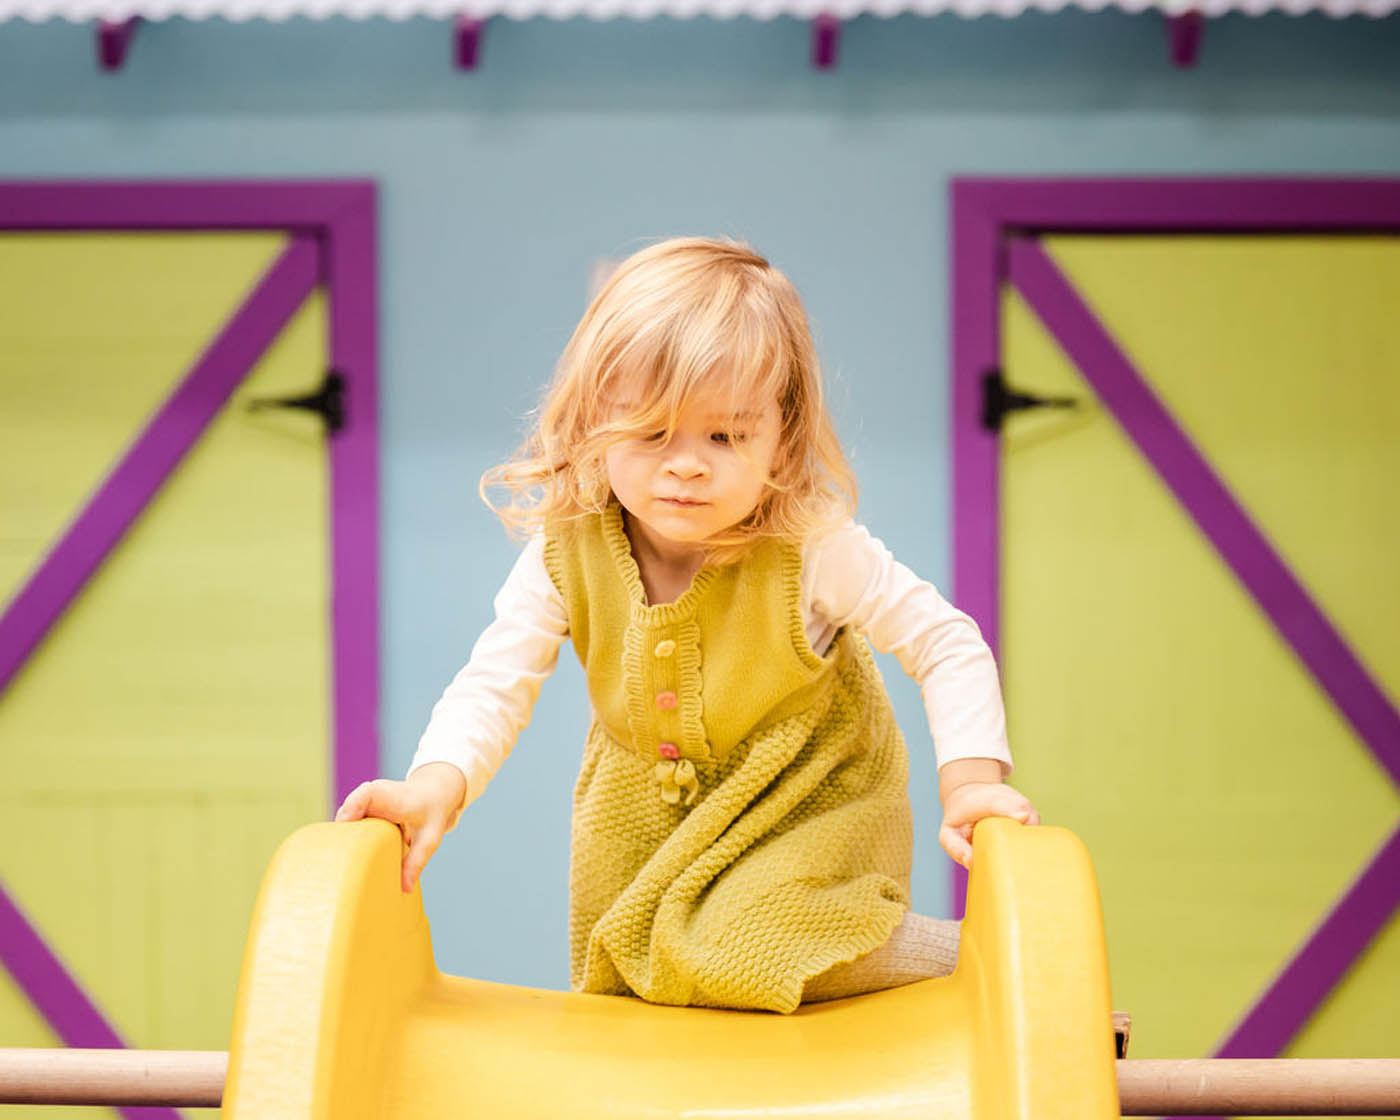 A toddler playing on a yellow slide at Romp n' Roll West End's classes for 3 year olds in Glen Allen, VA